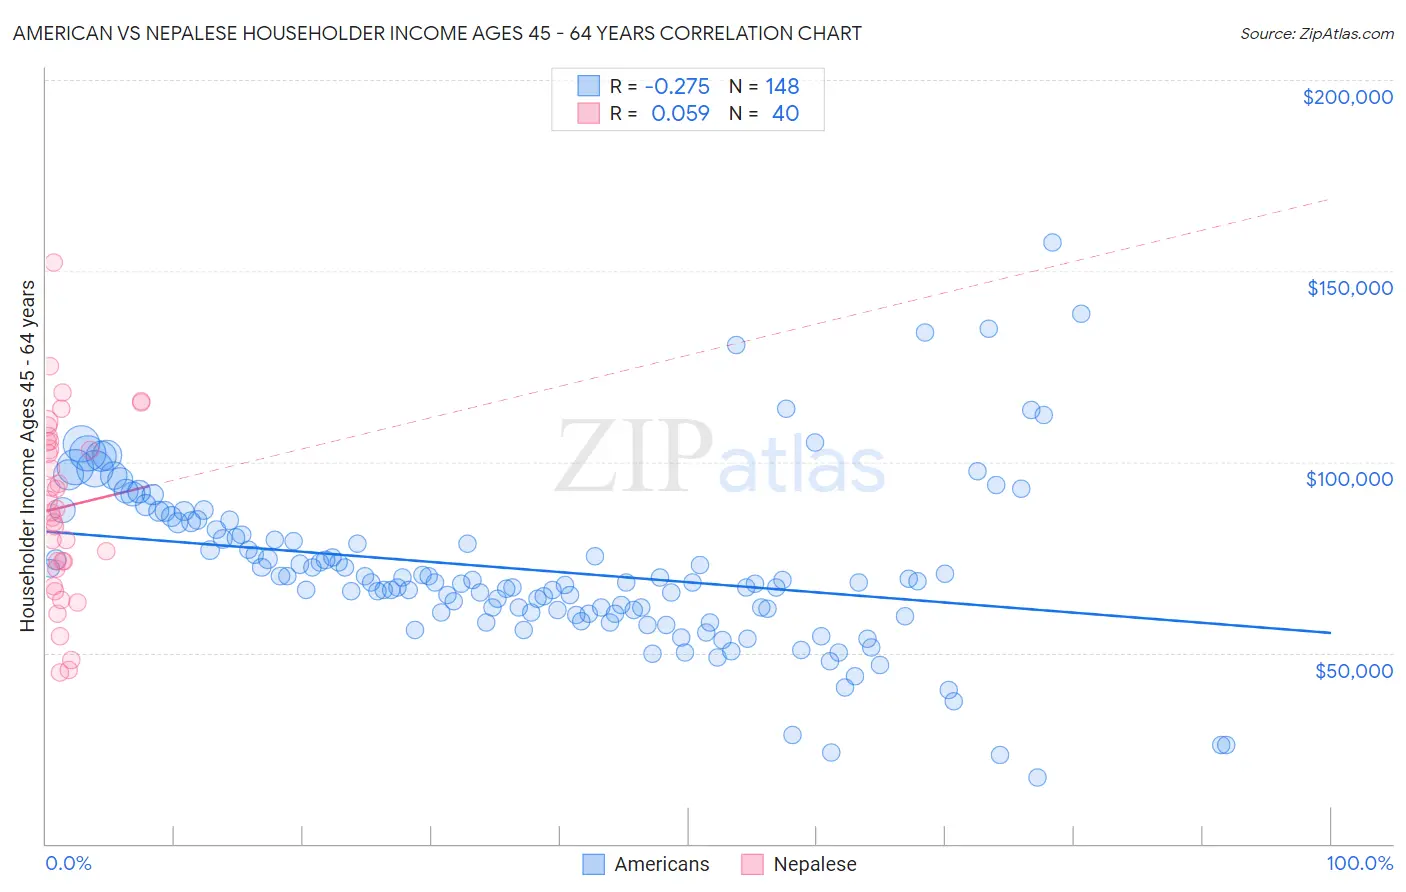 American vs Nepalese Householder Income Ages 45 - 64 years